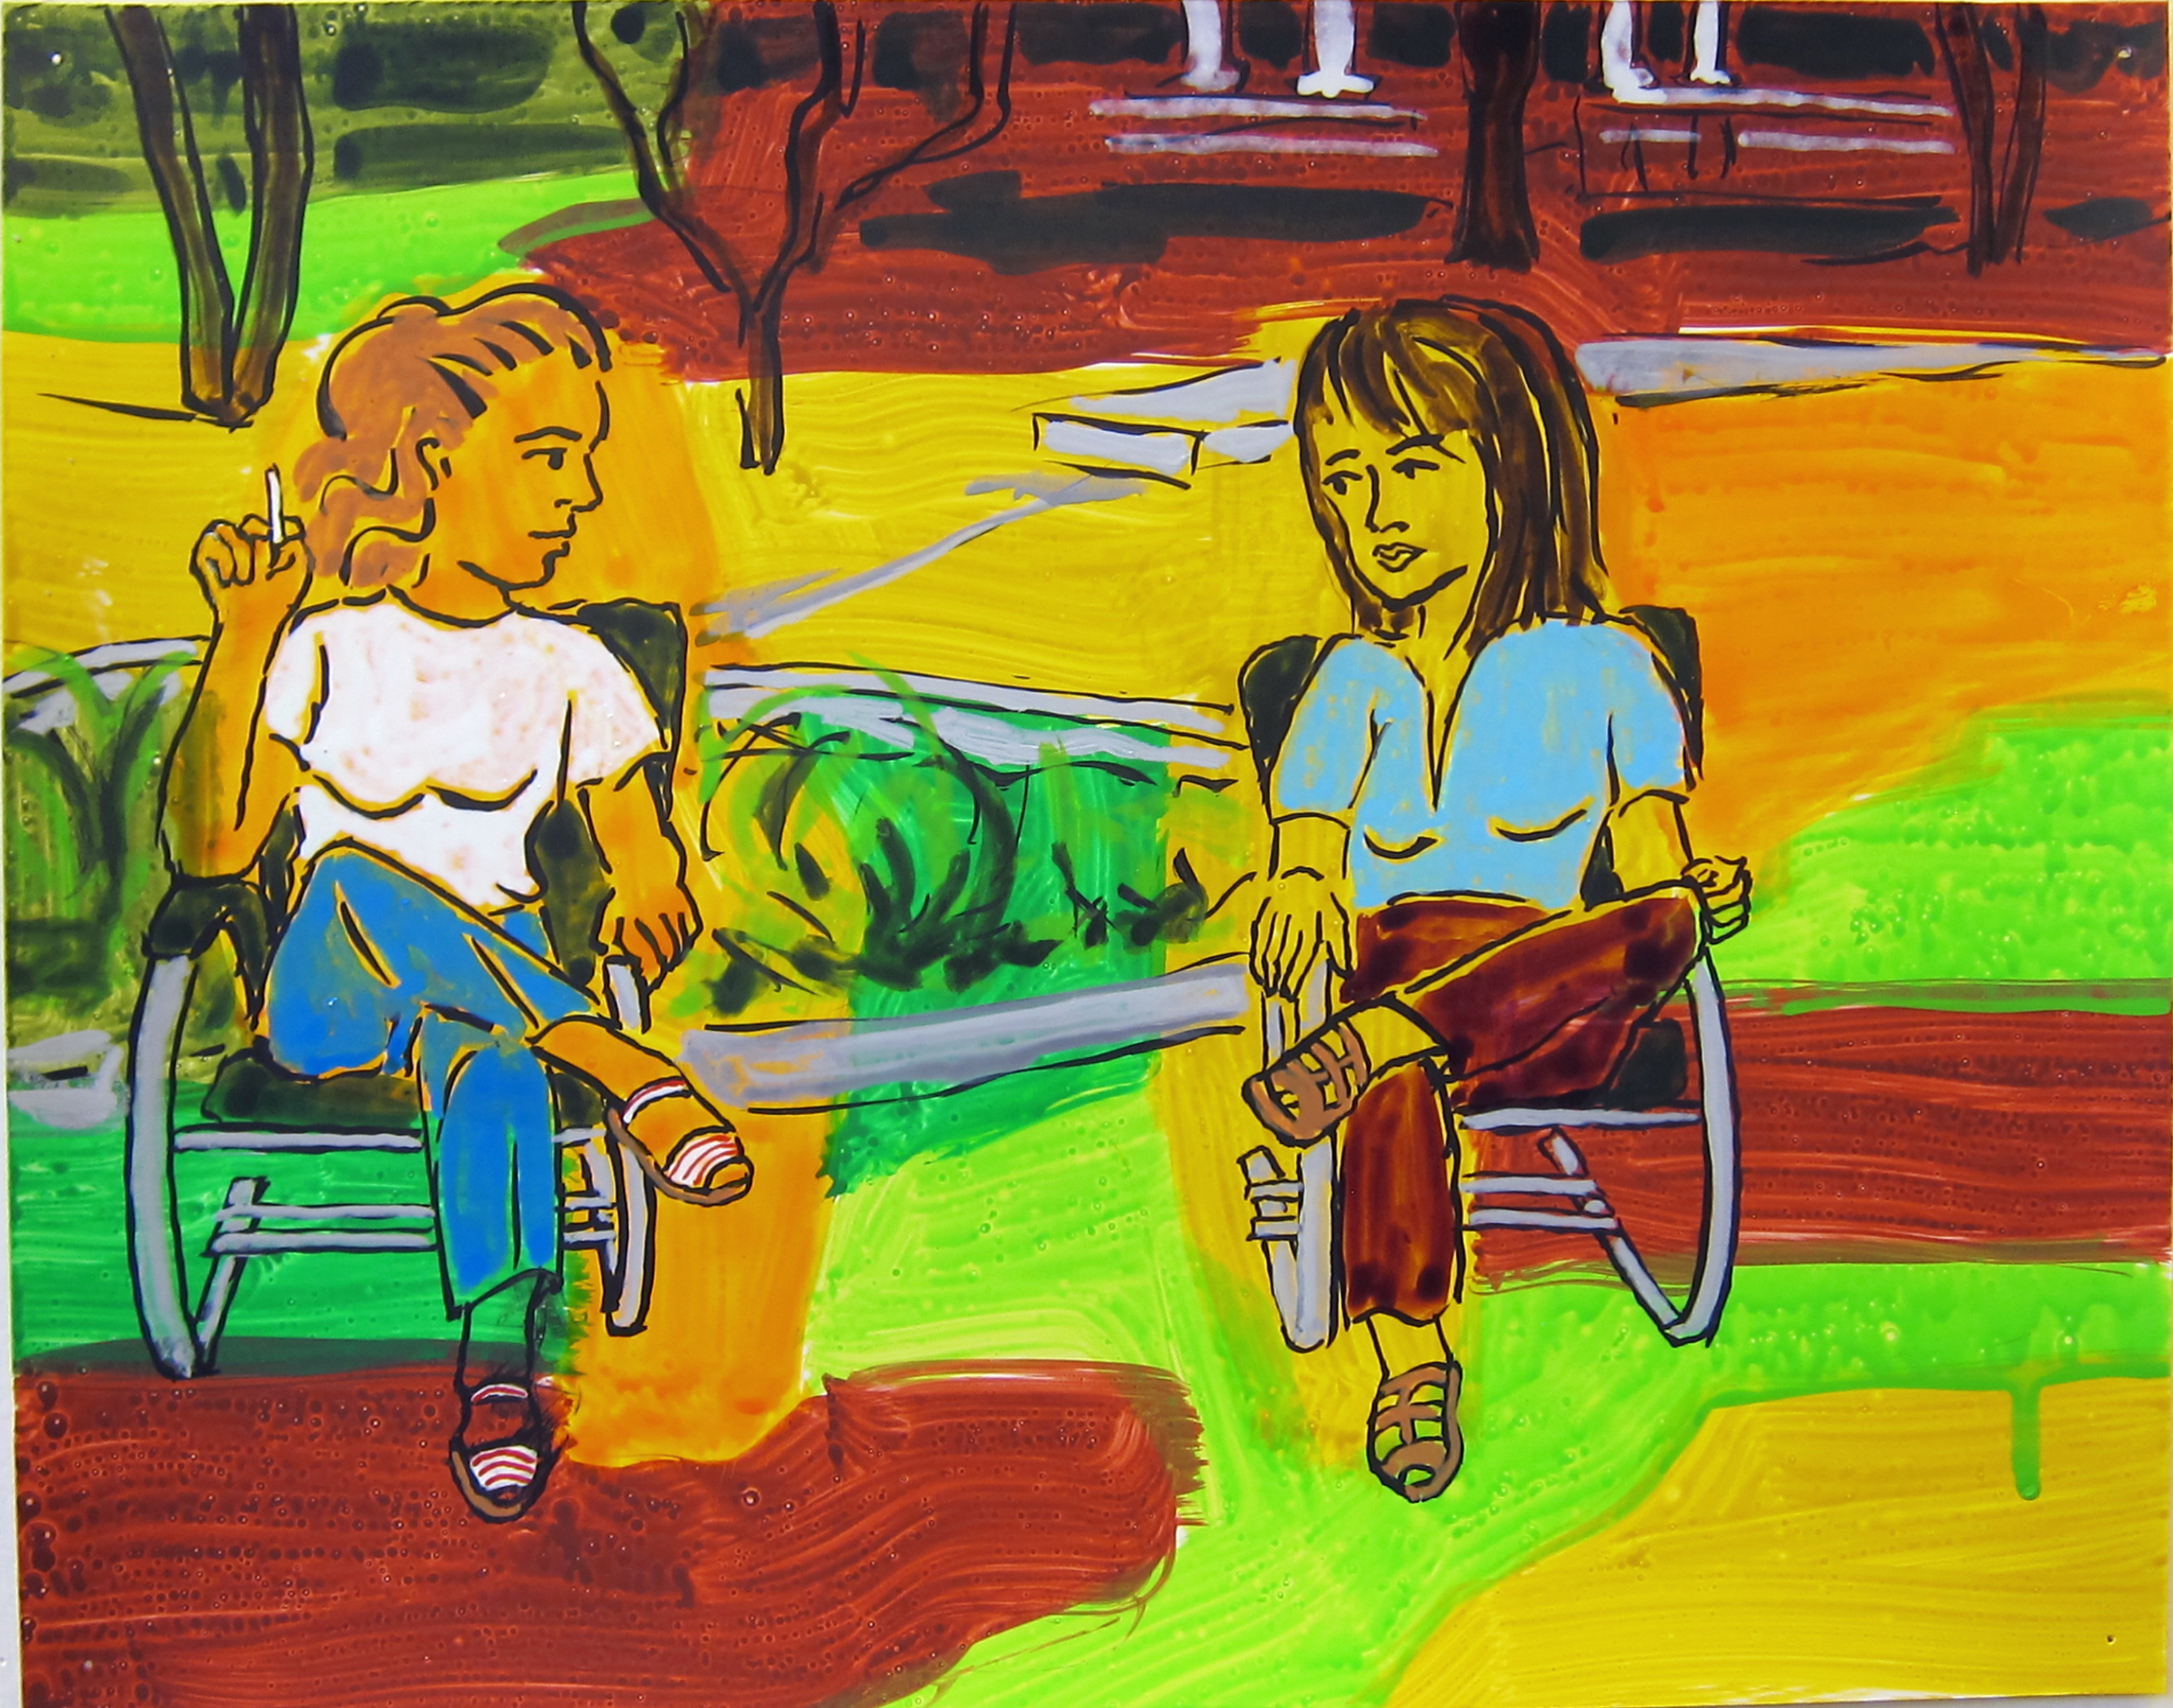   Two Women in Lawn Chairs , 2016  9.5"x12" ink on paper  PRIVATE COLLECTION 